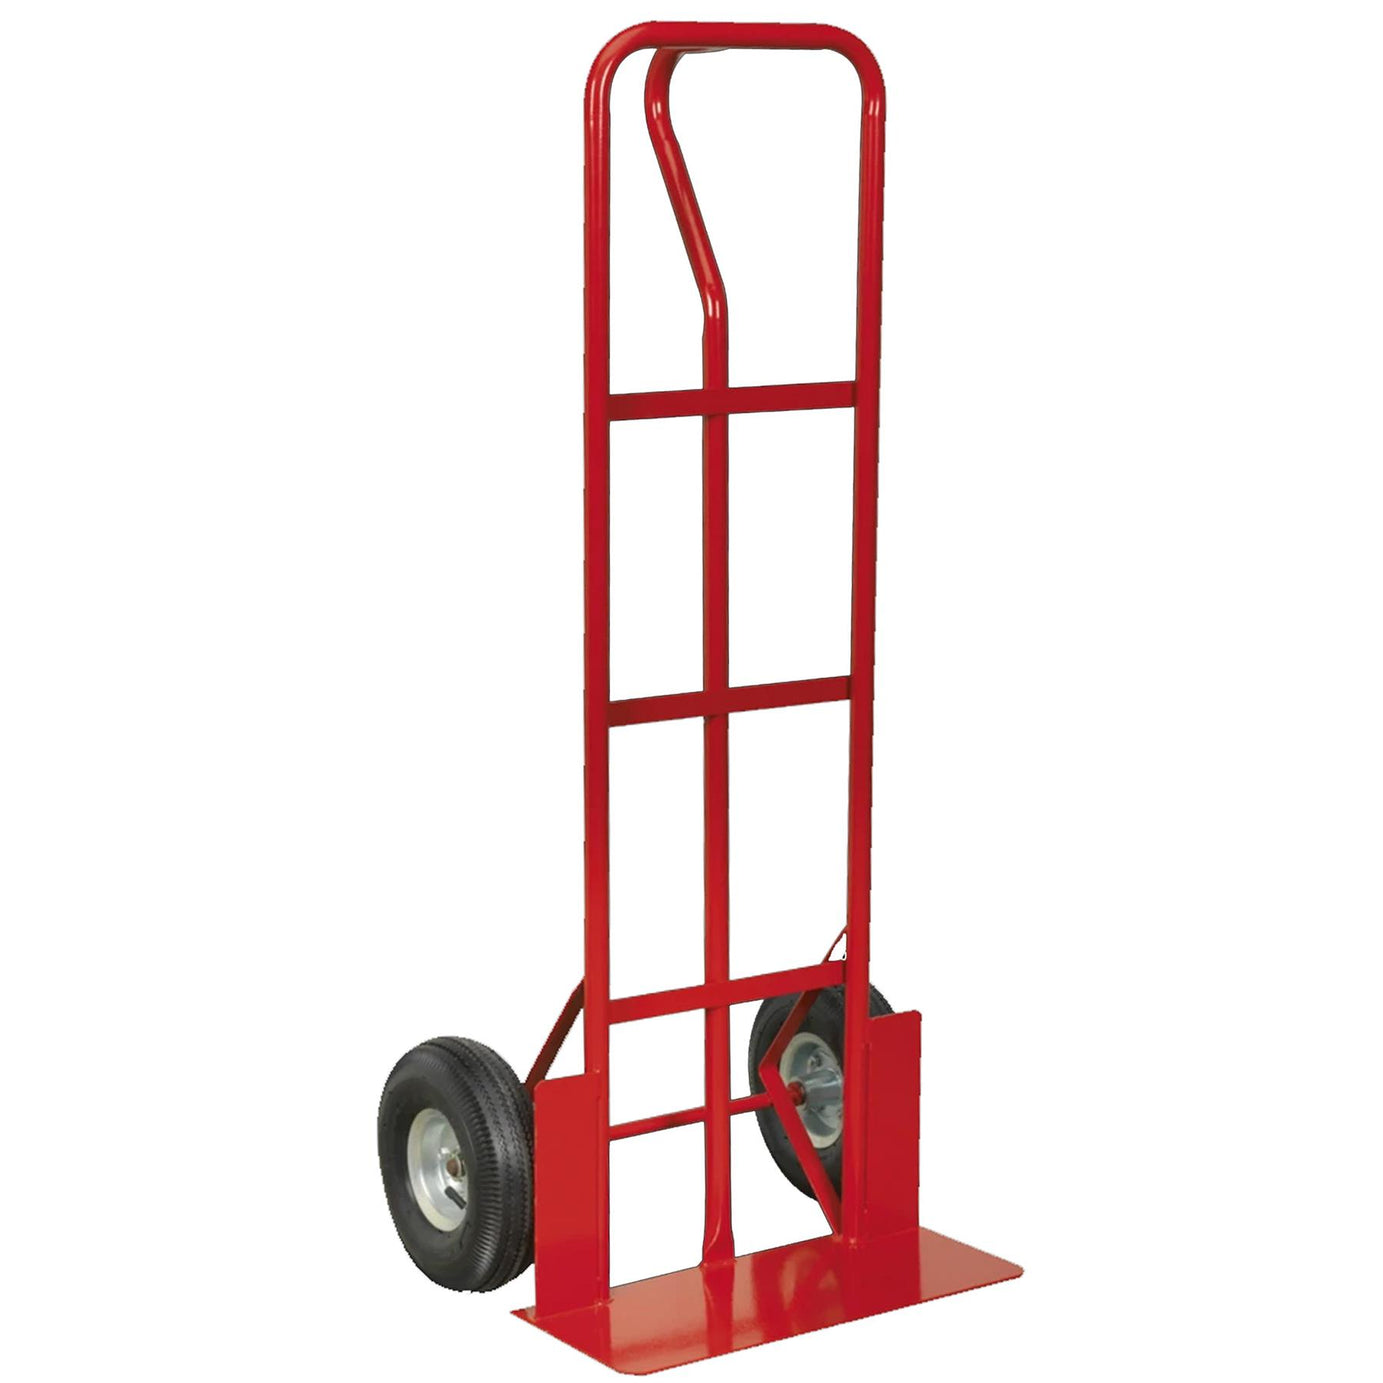 Sealey Sack Truck Pneumatic Tyres 250kg Capacity - CST988